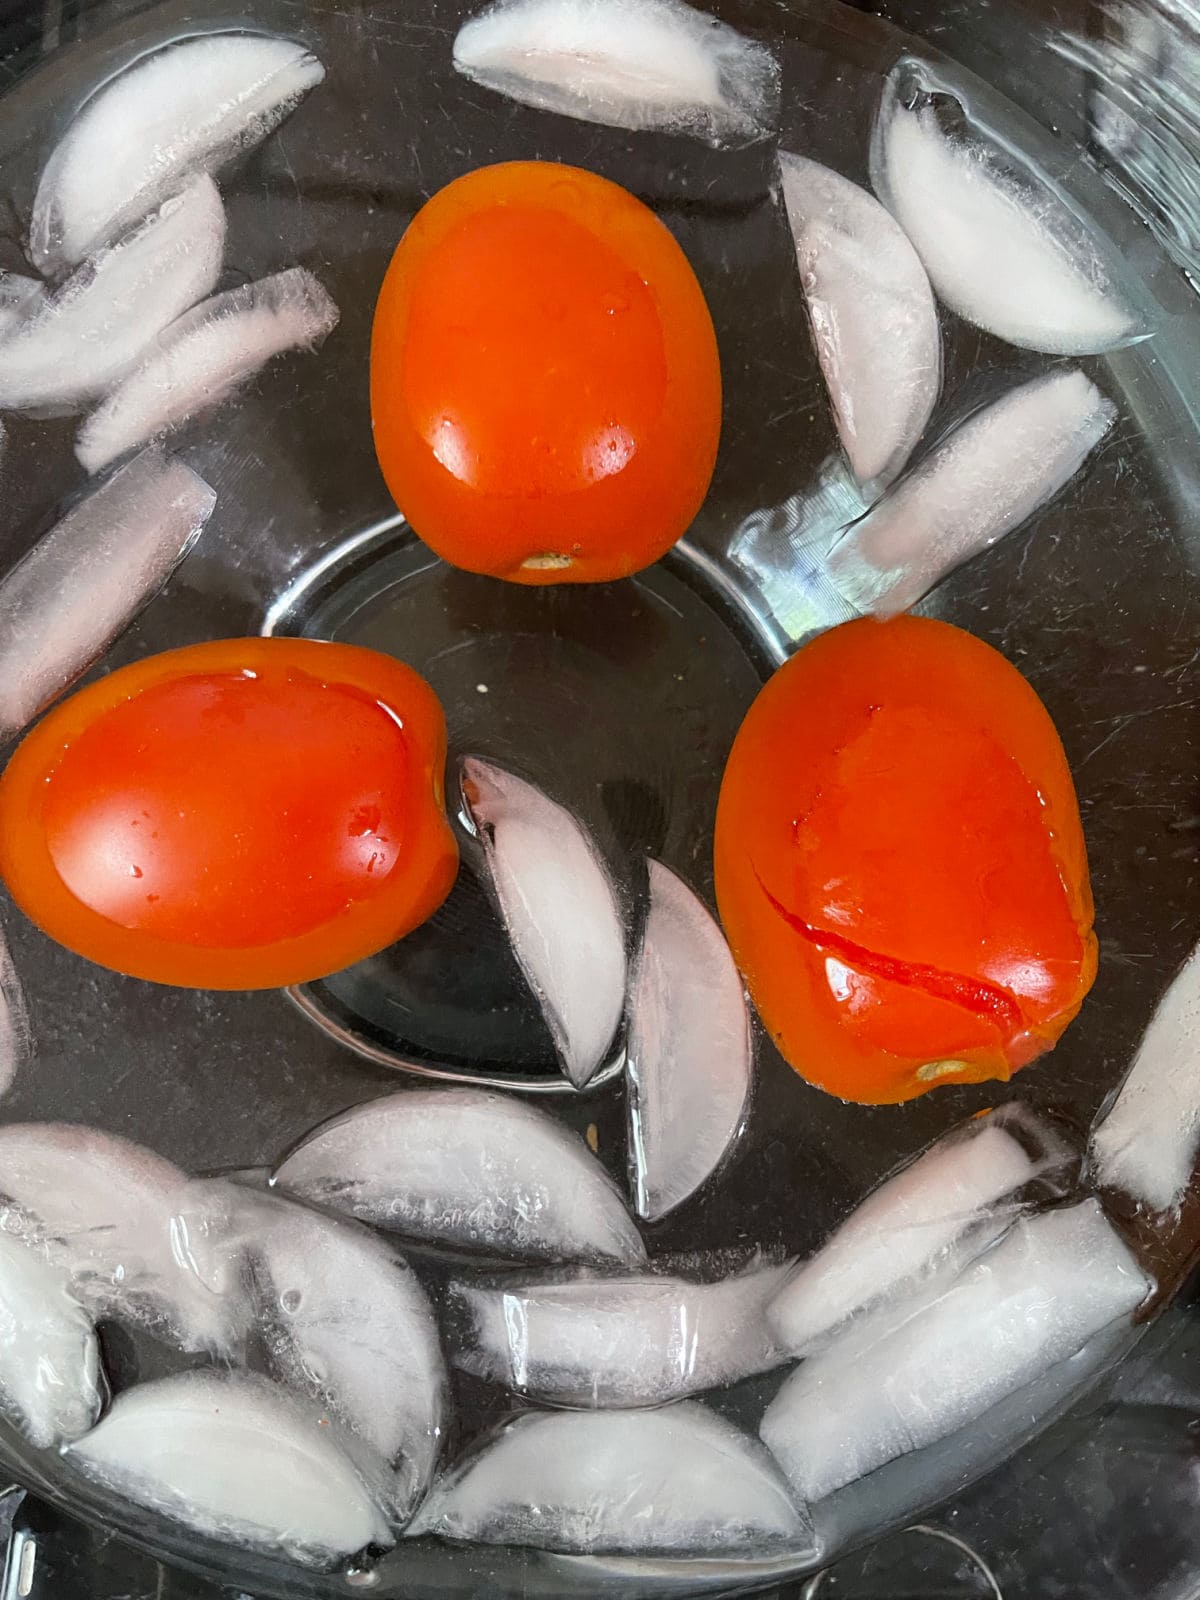 Tomatoes in an ice bath before peeling.